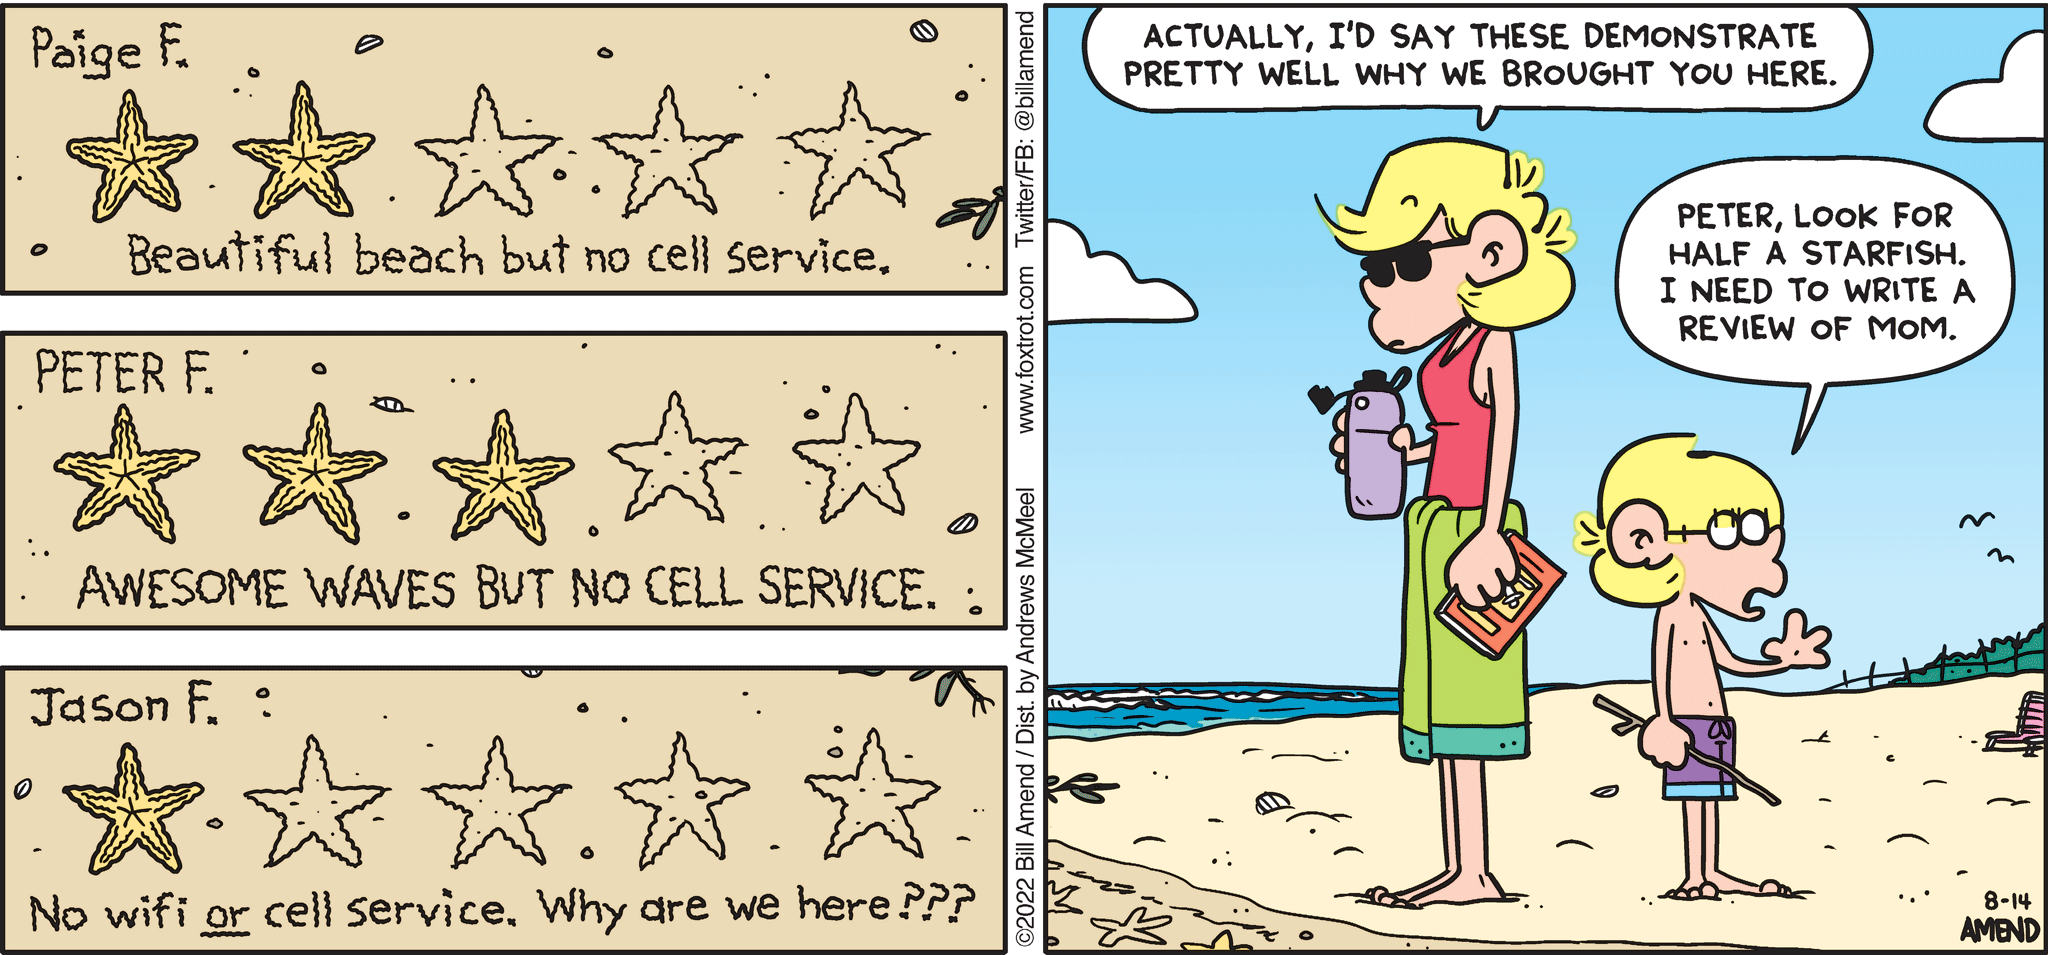 FoxTrot comic strip by Bill Amend - "Sea Cells" published August 14, 2022 - Transcript: Andy Fox: Actually, I'd say these demonstrate pretty well why we brought you here. Jason Fox: Peter, look for a half a starfish. I need to write a review of mom.